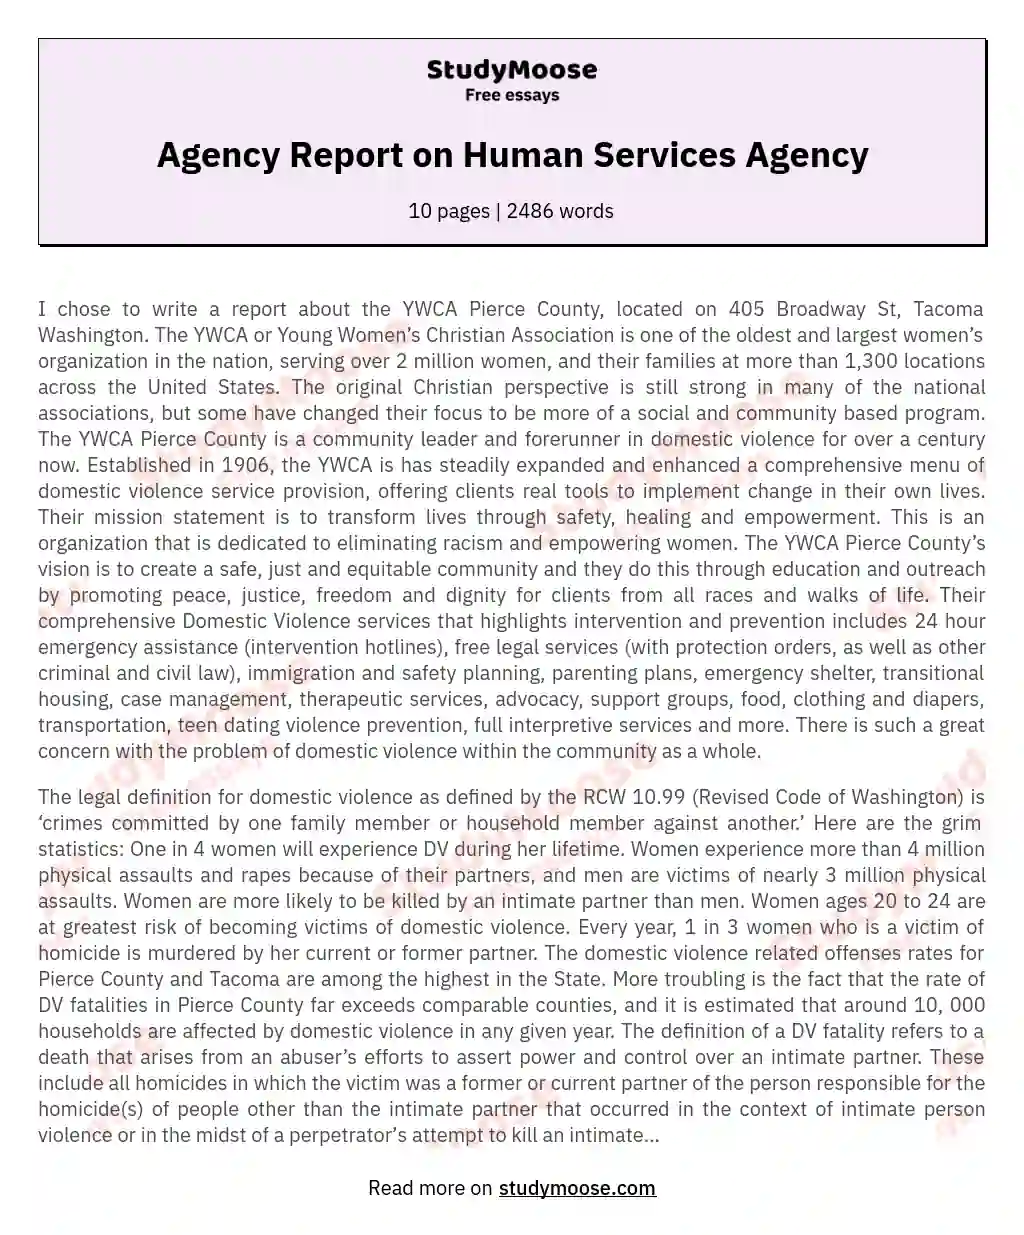 Agency Report on Human Services Agency